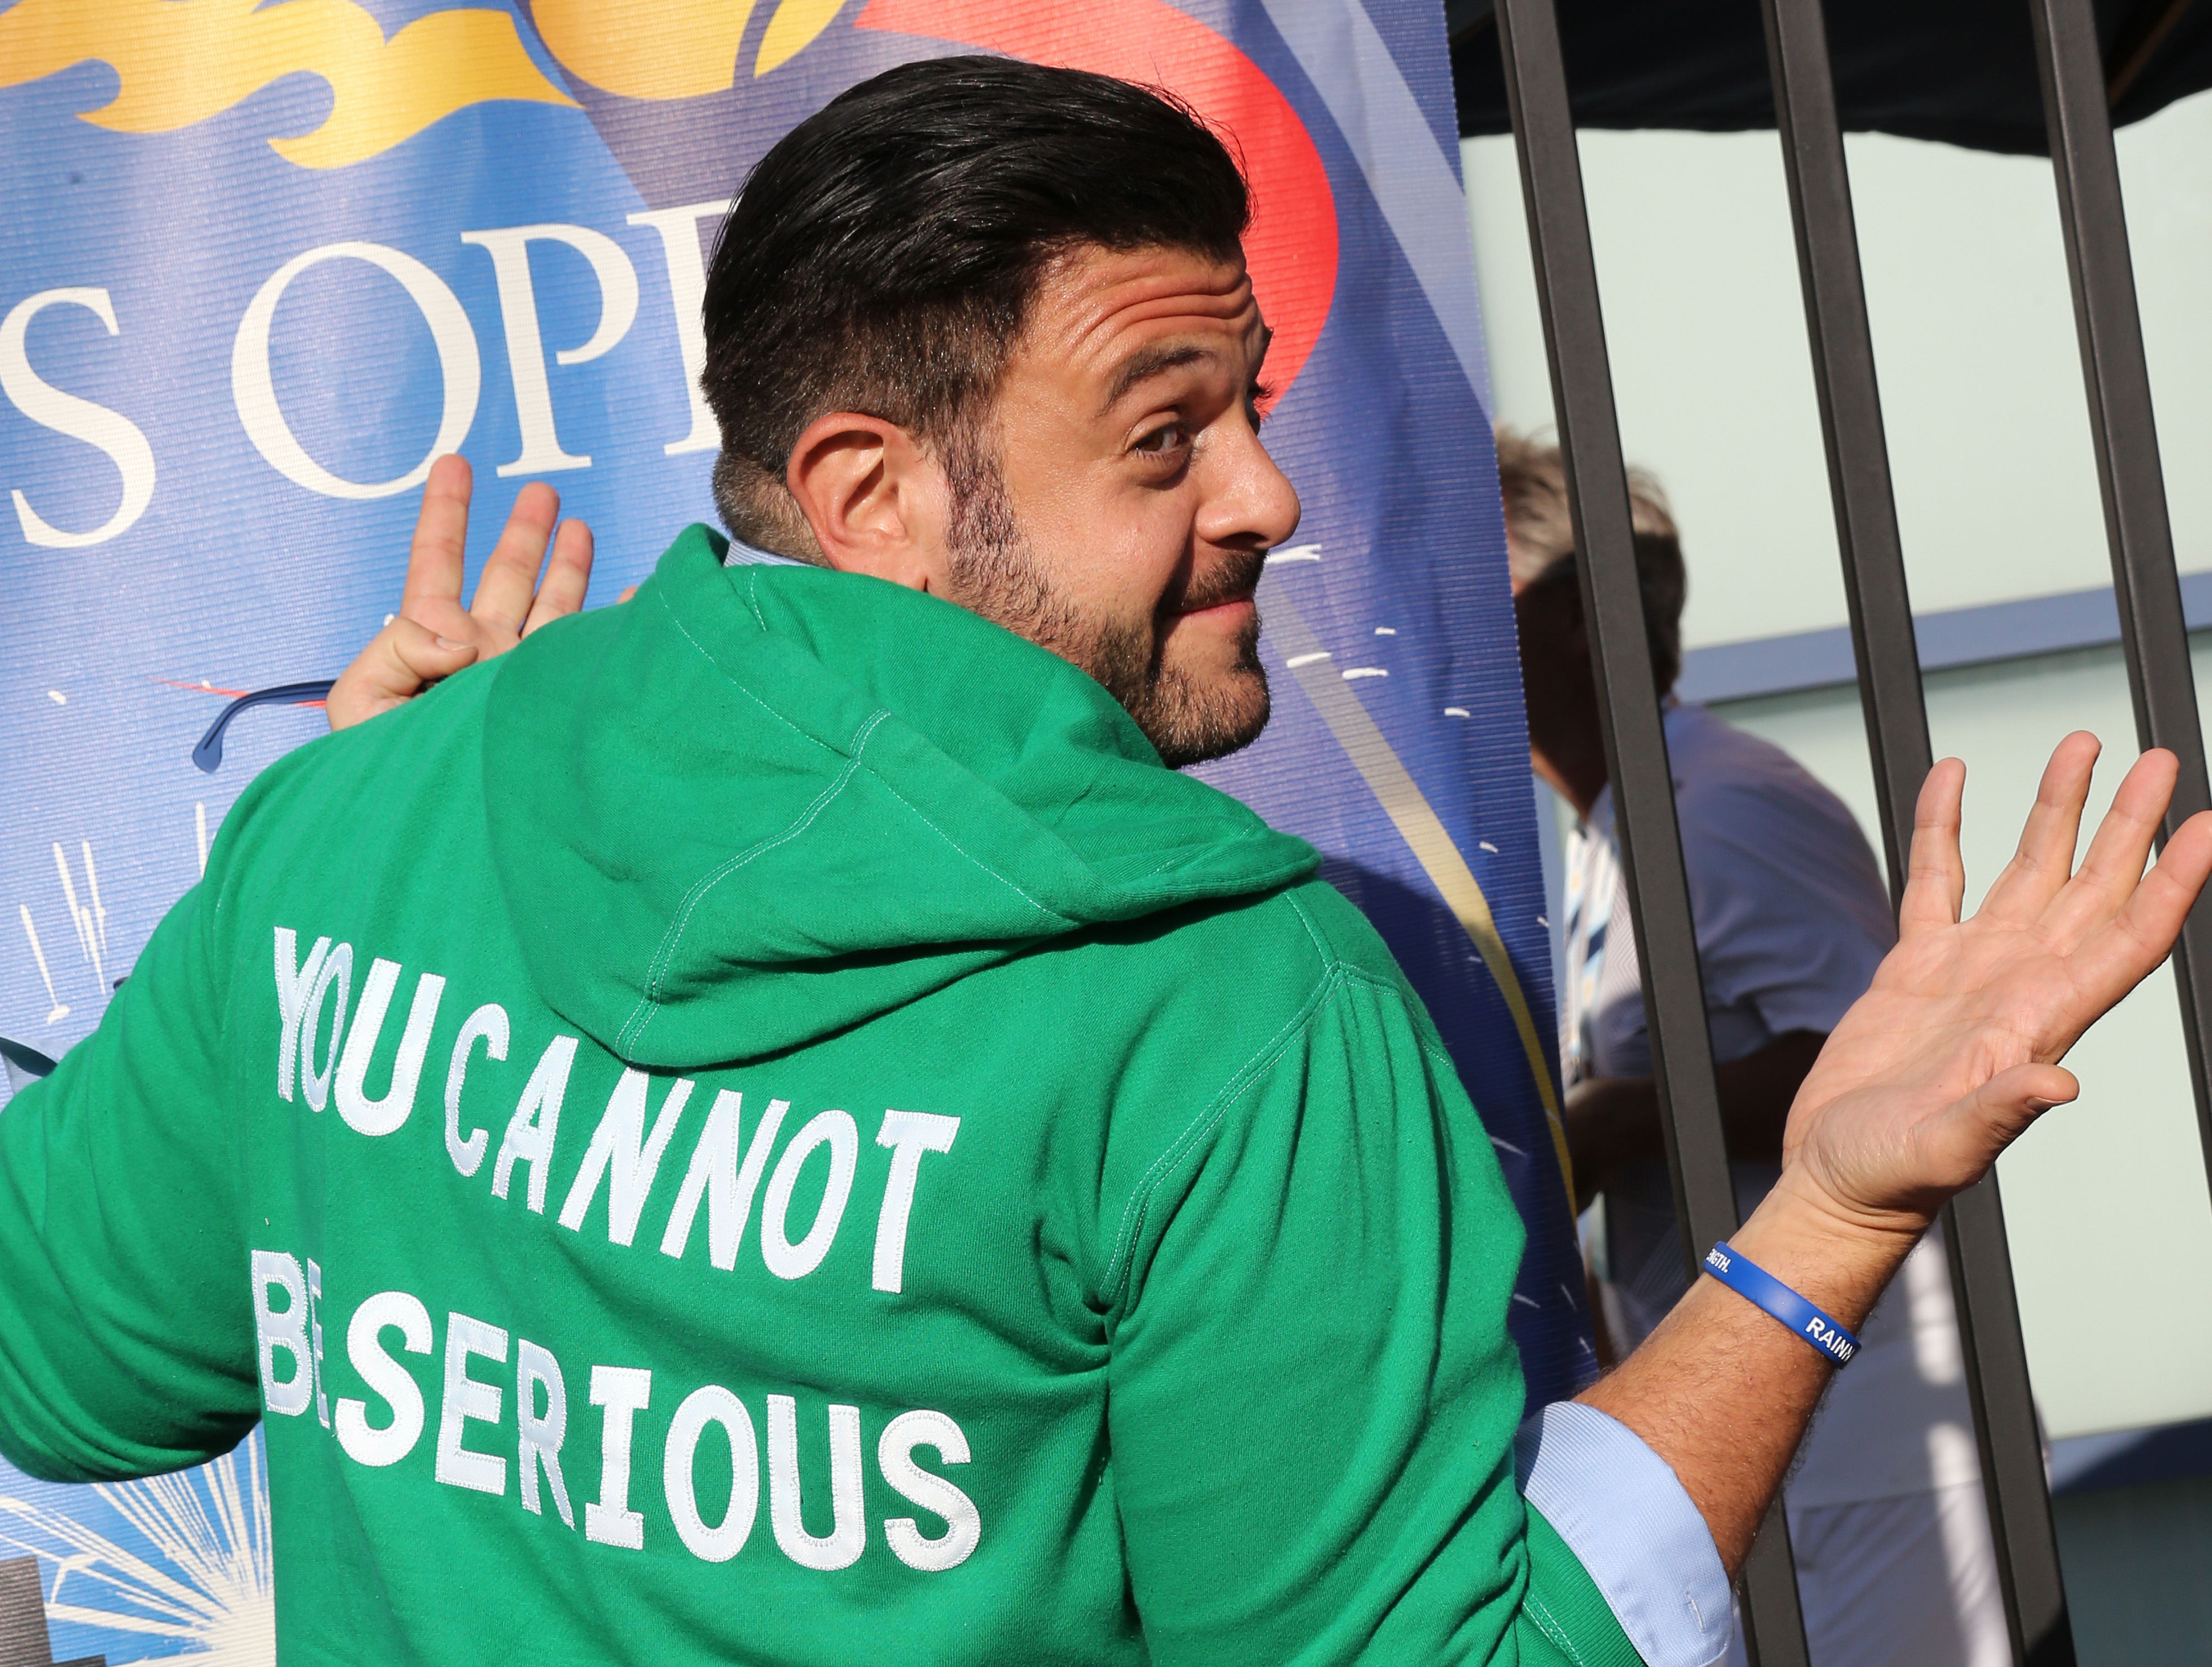 Adam Richman attends Day 4 of the 2014 US Open (Jean Catuffe&mdash;GC Images)